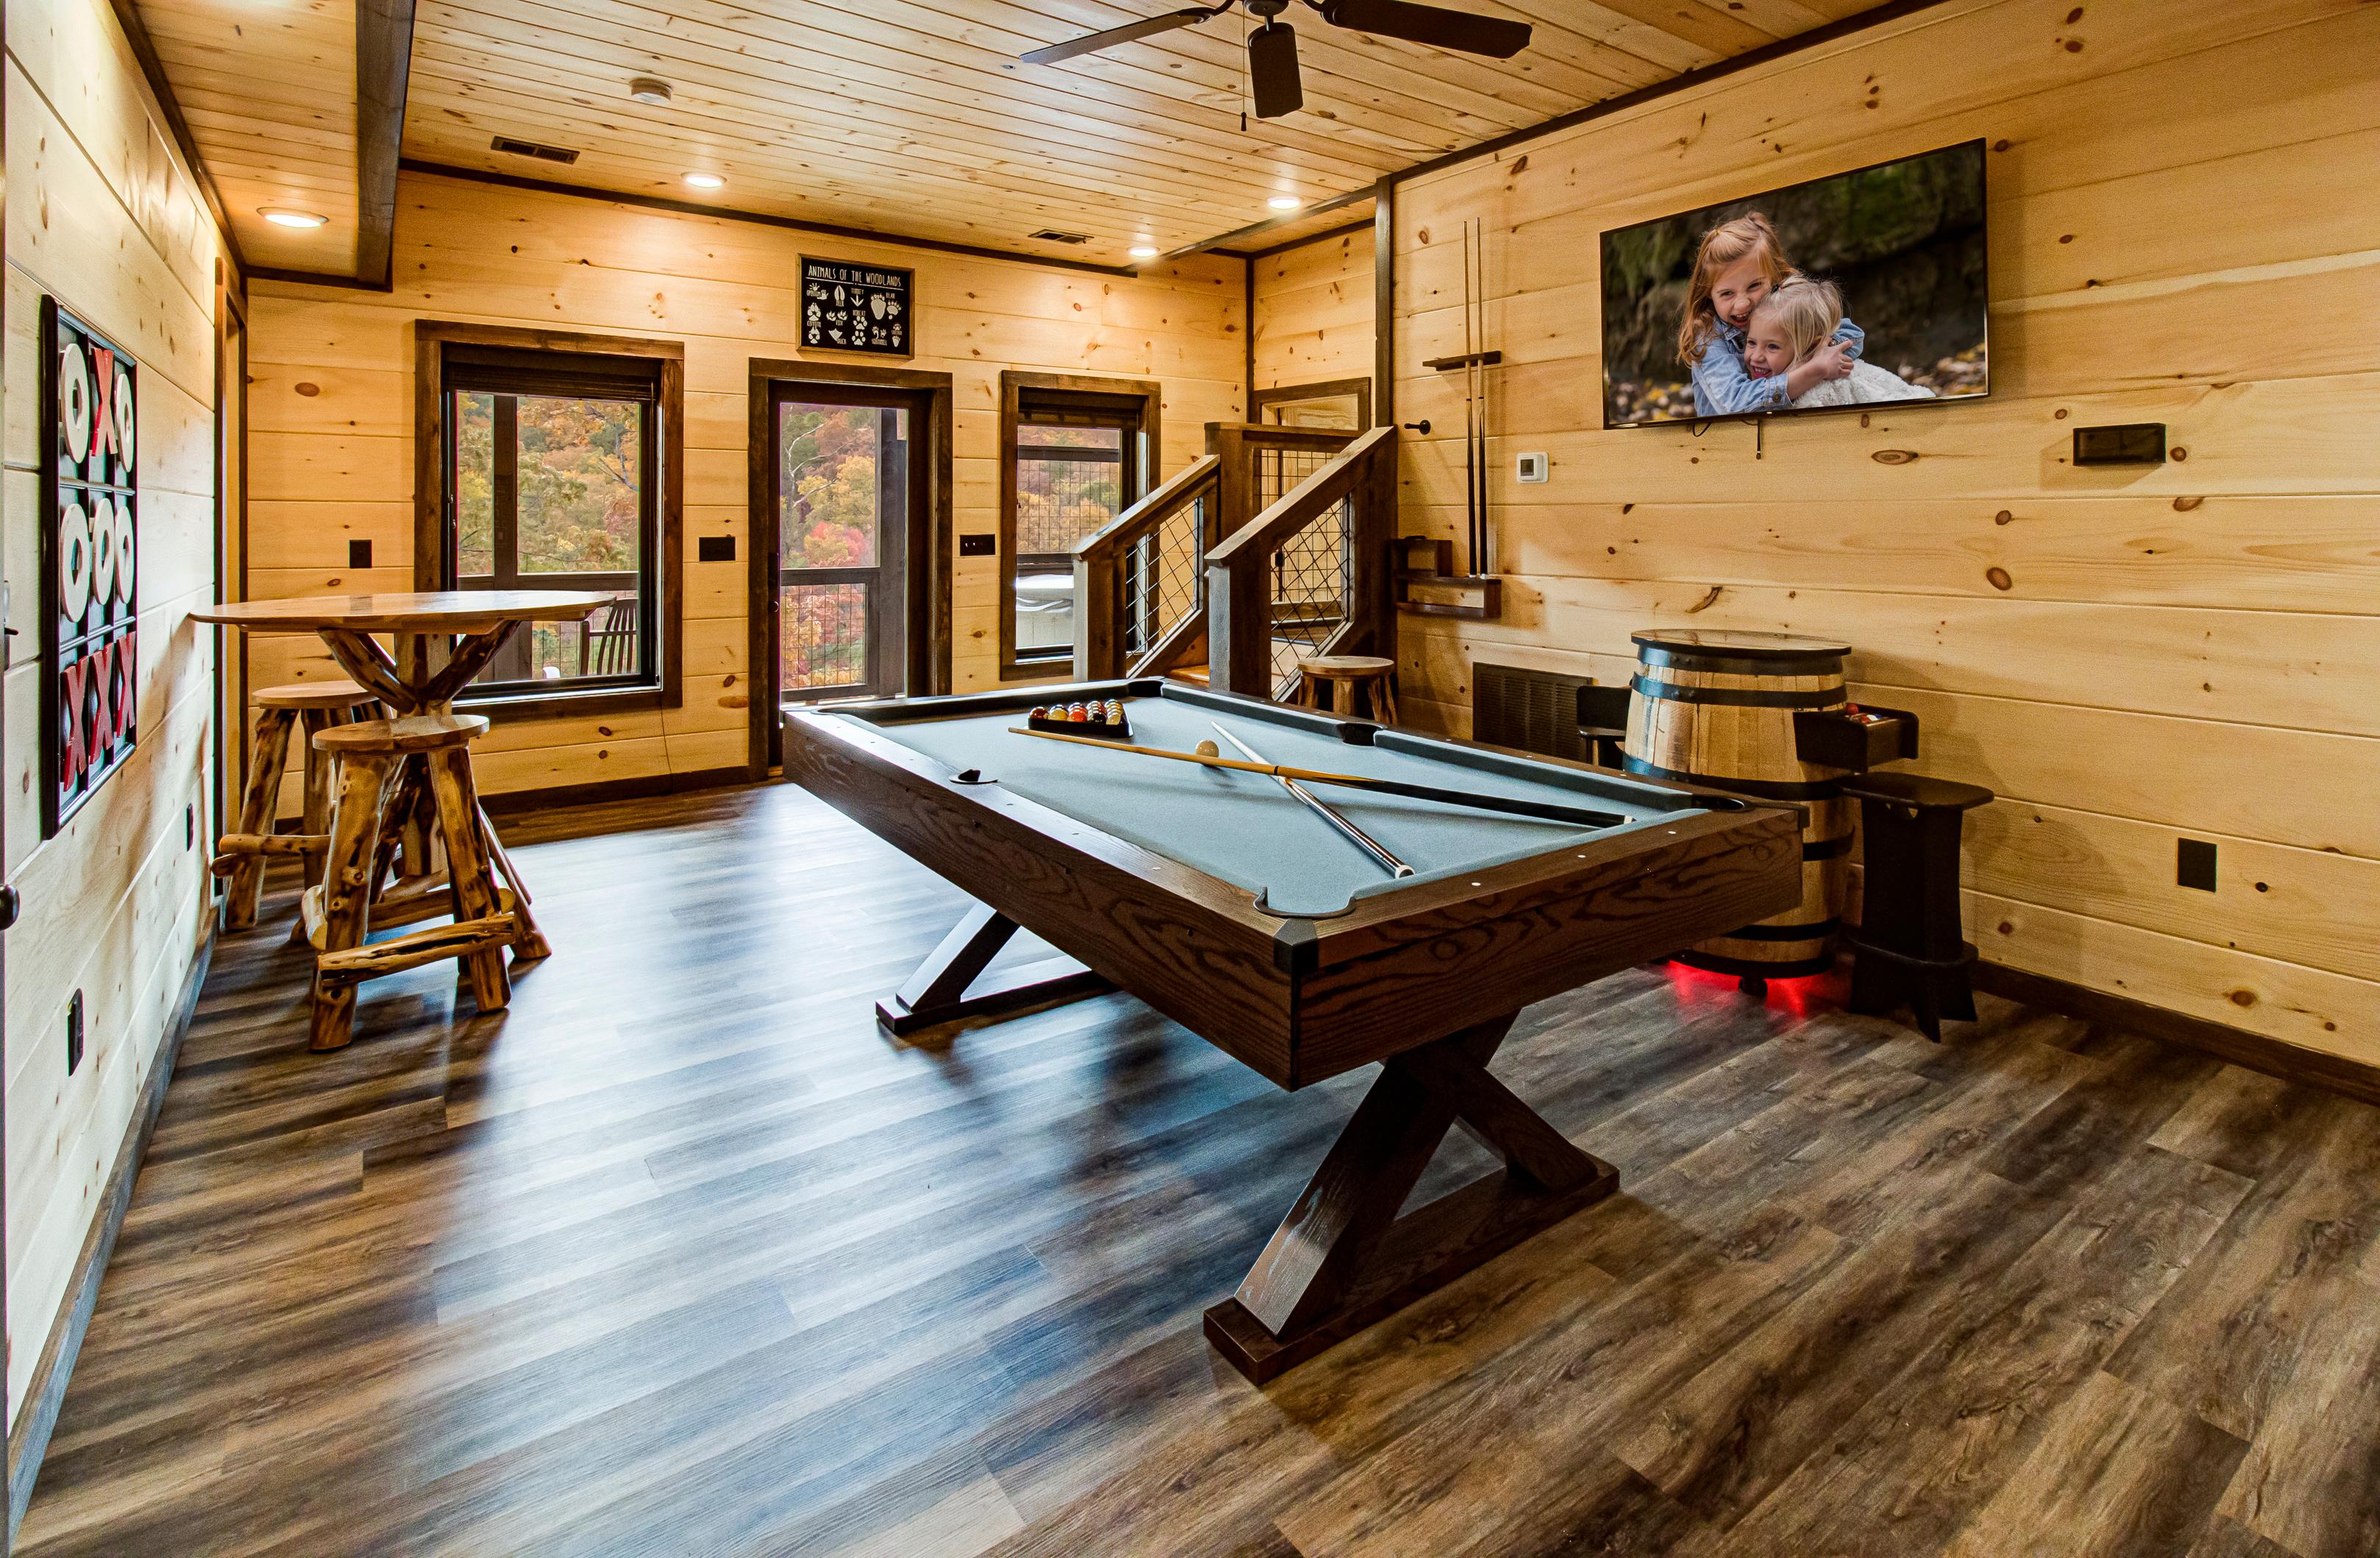 Pool Table with Bourbon Barrel Arcade Game